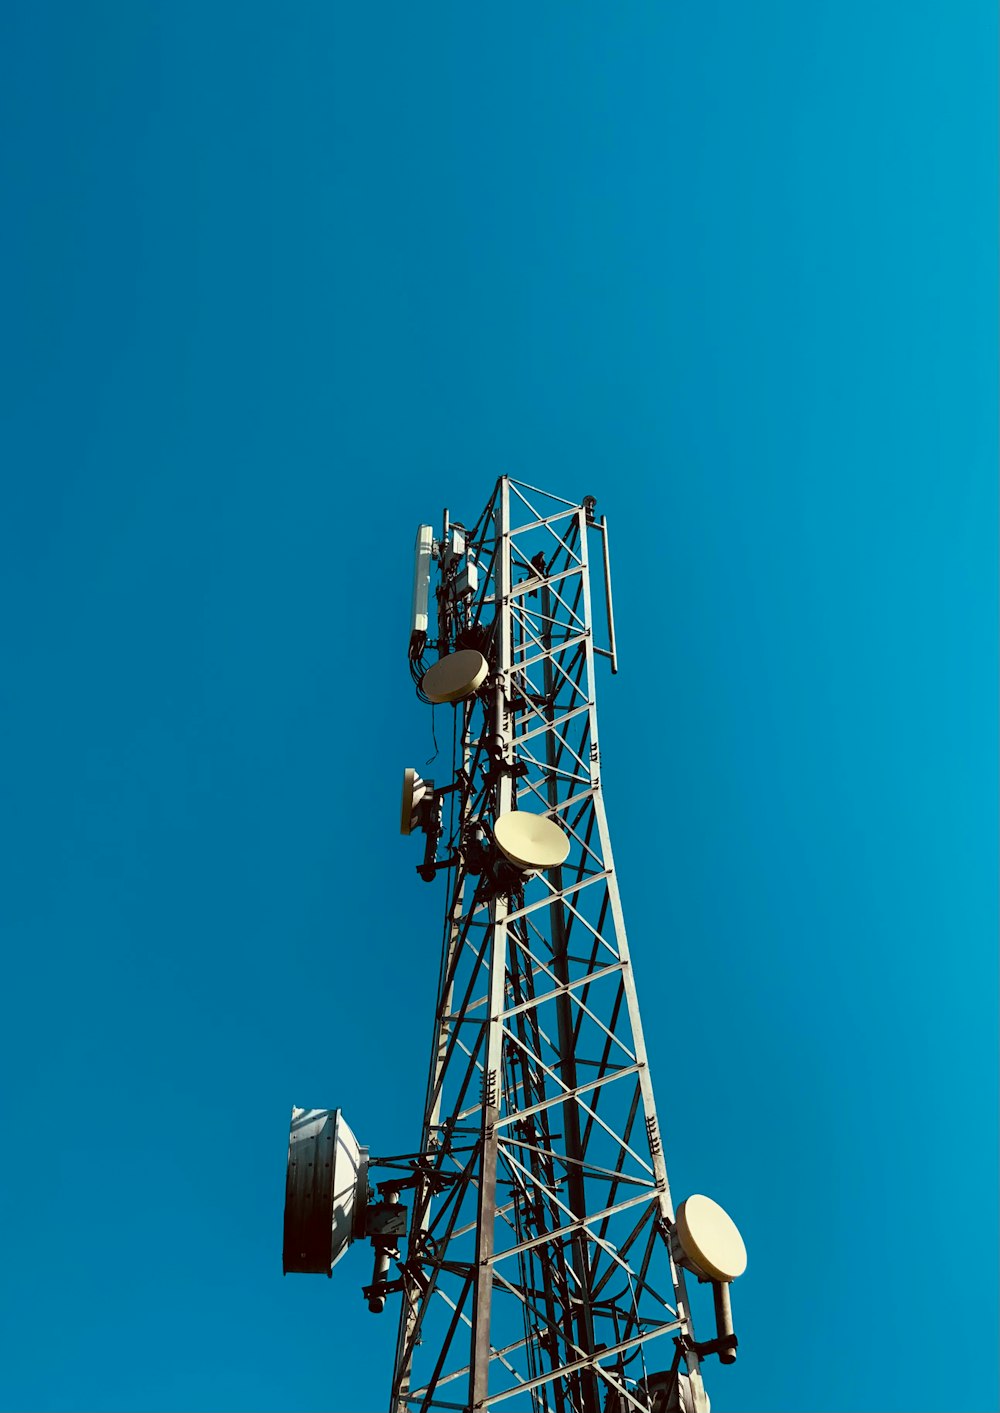 a cell phone tower with a blue sky in the background